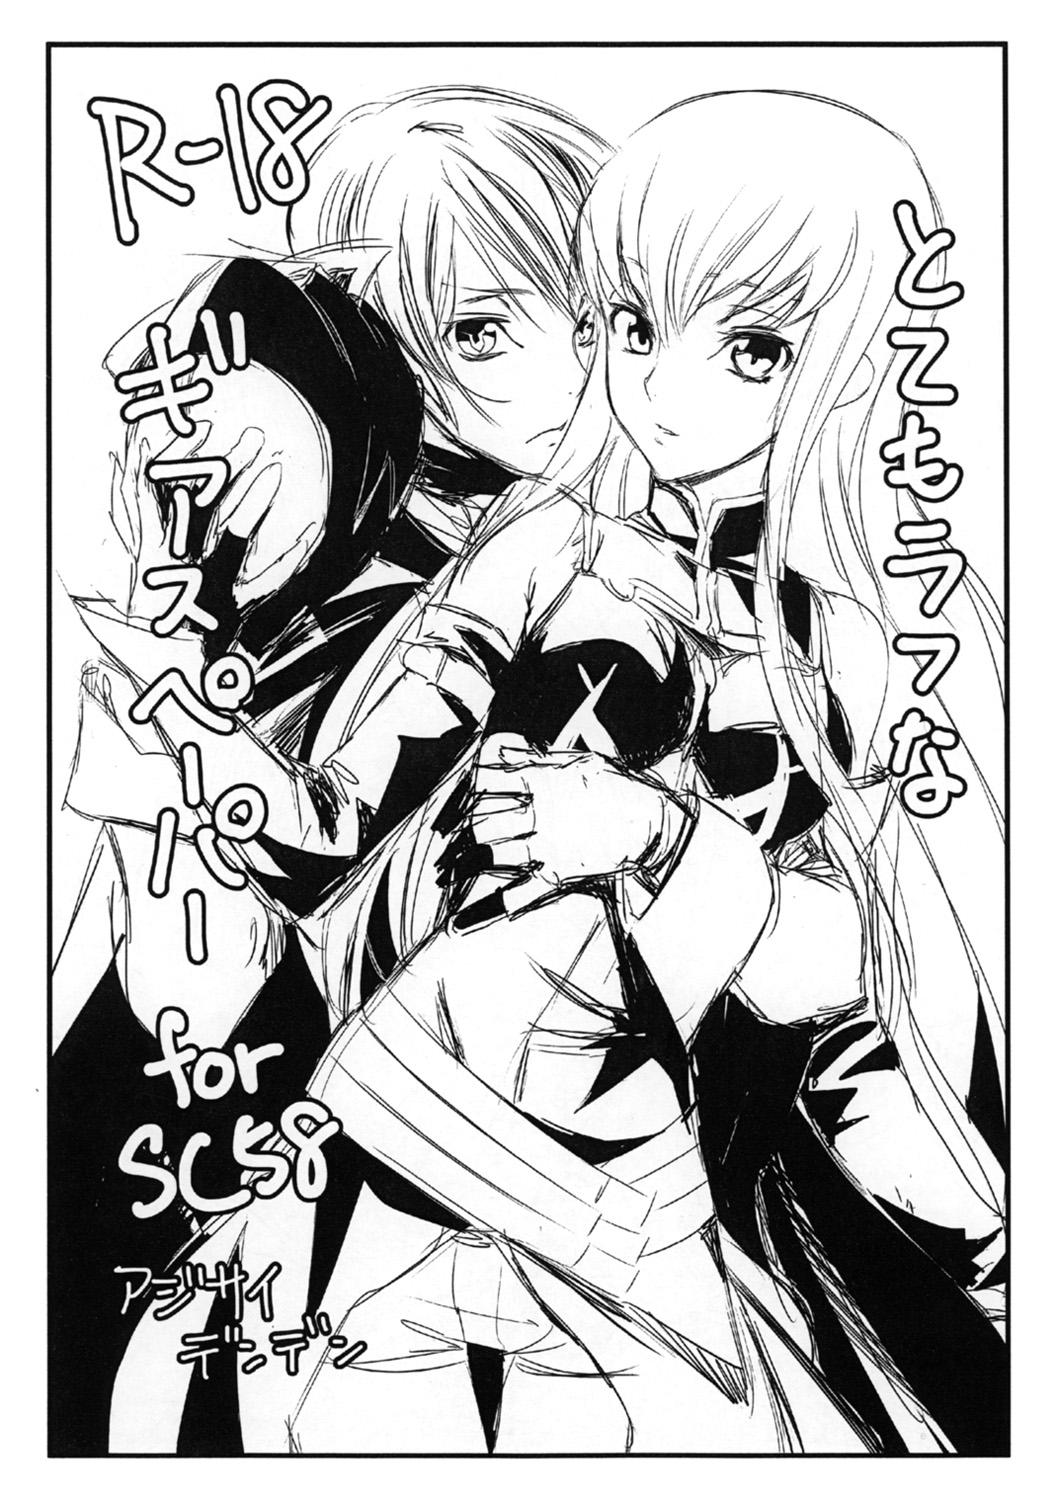 Hot Girls Getting Fucked Totemo Rough na Geass Paper for SC58 - Code geass Tribbing - Page 1